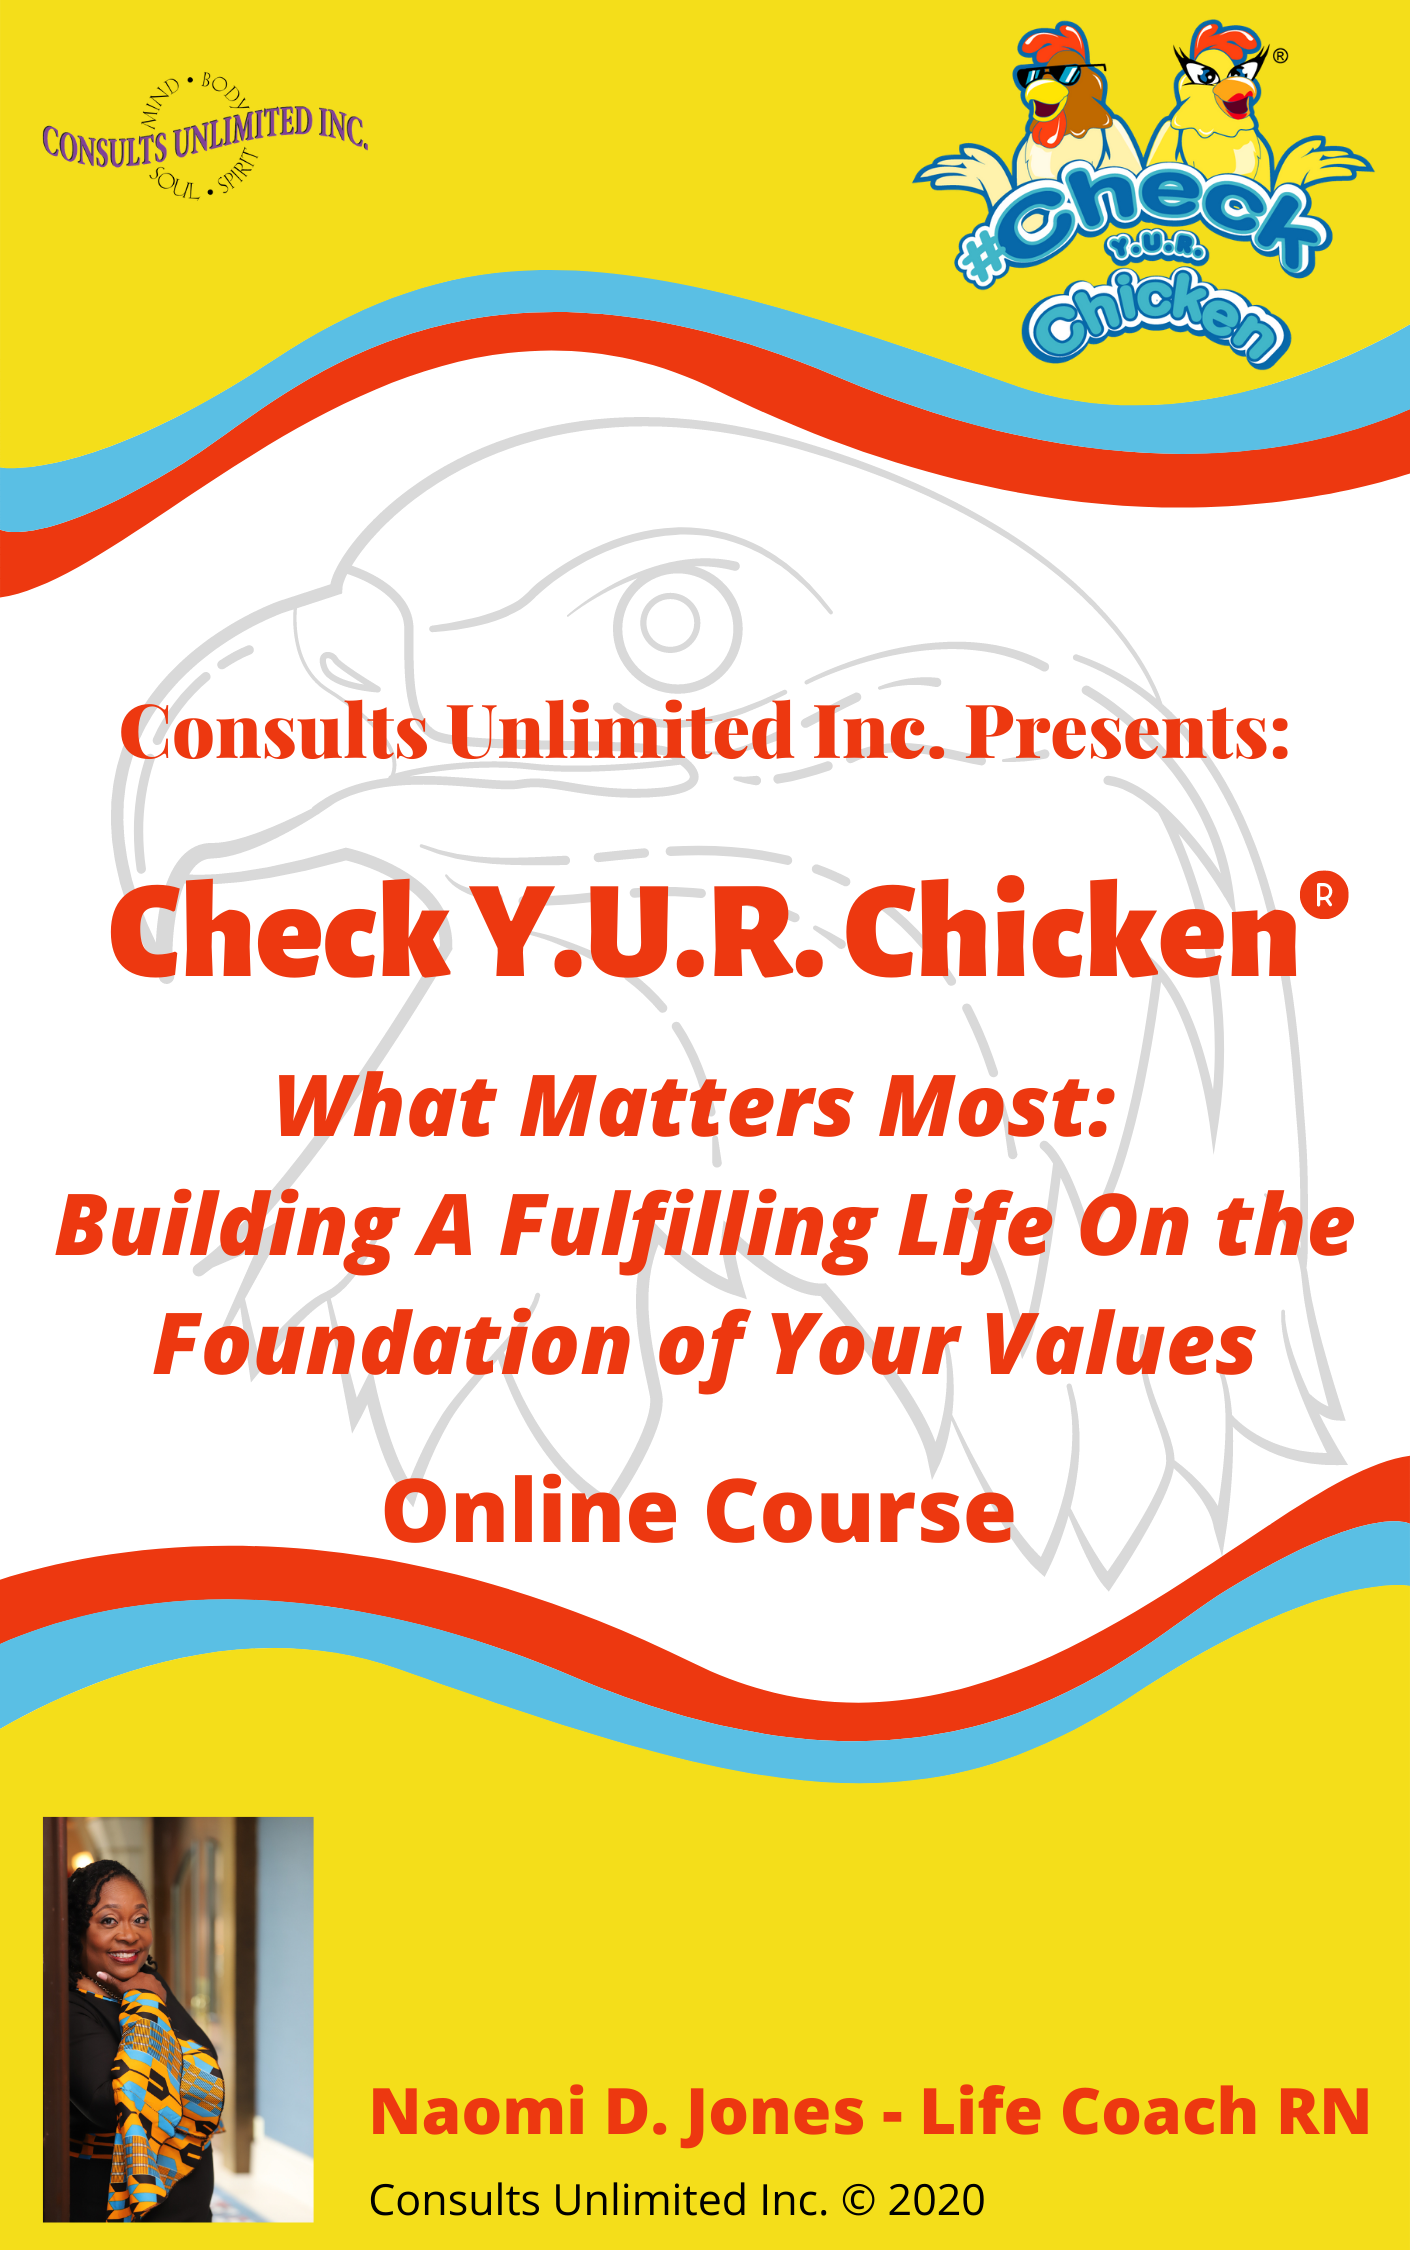 What Matters Most Online Course